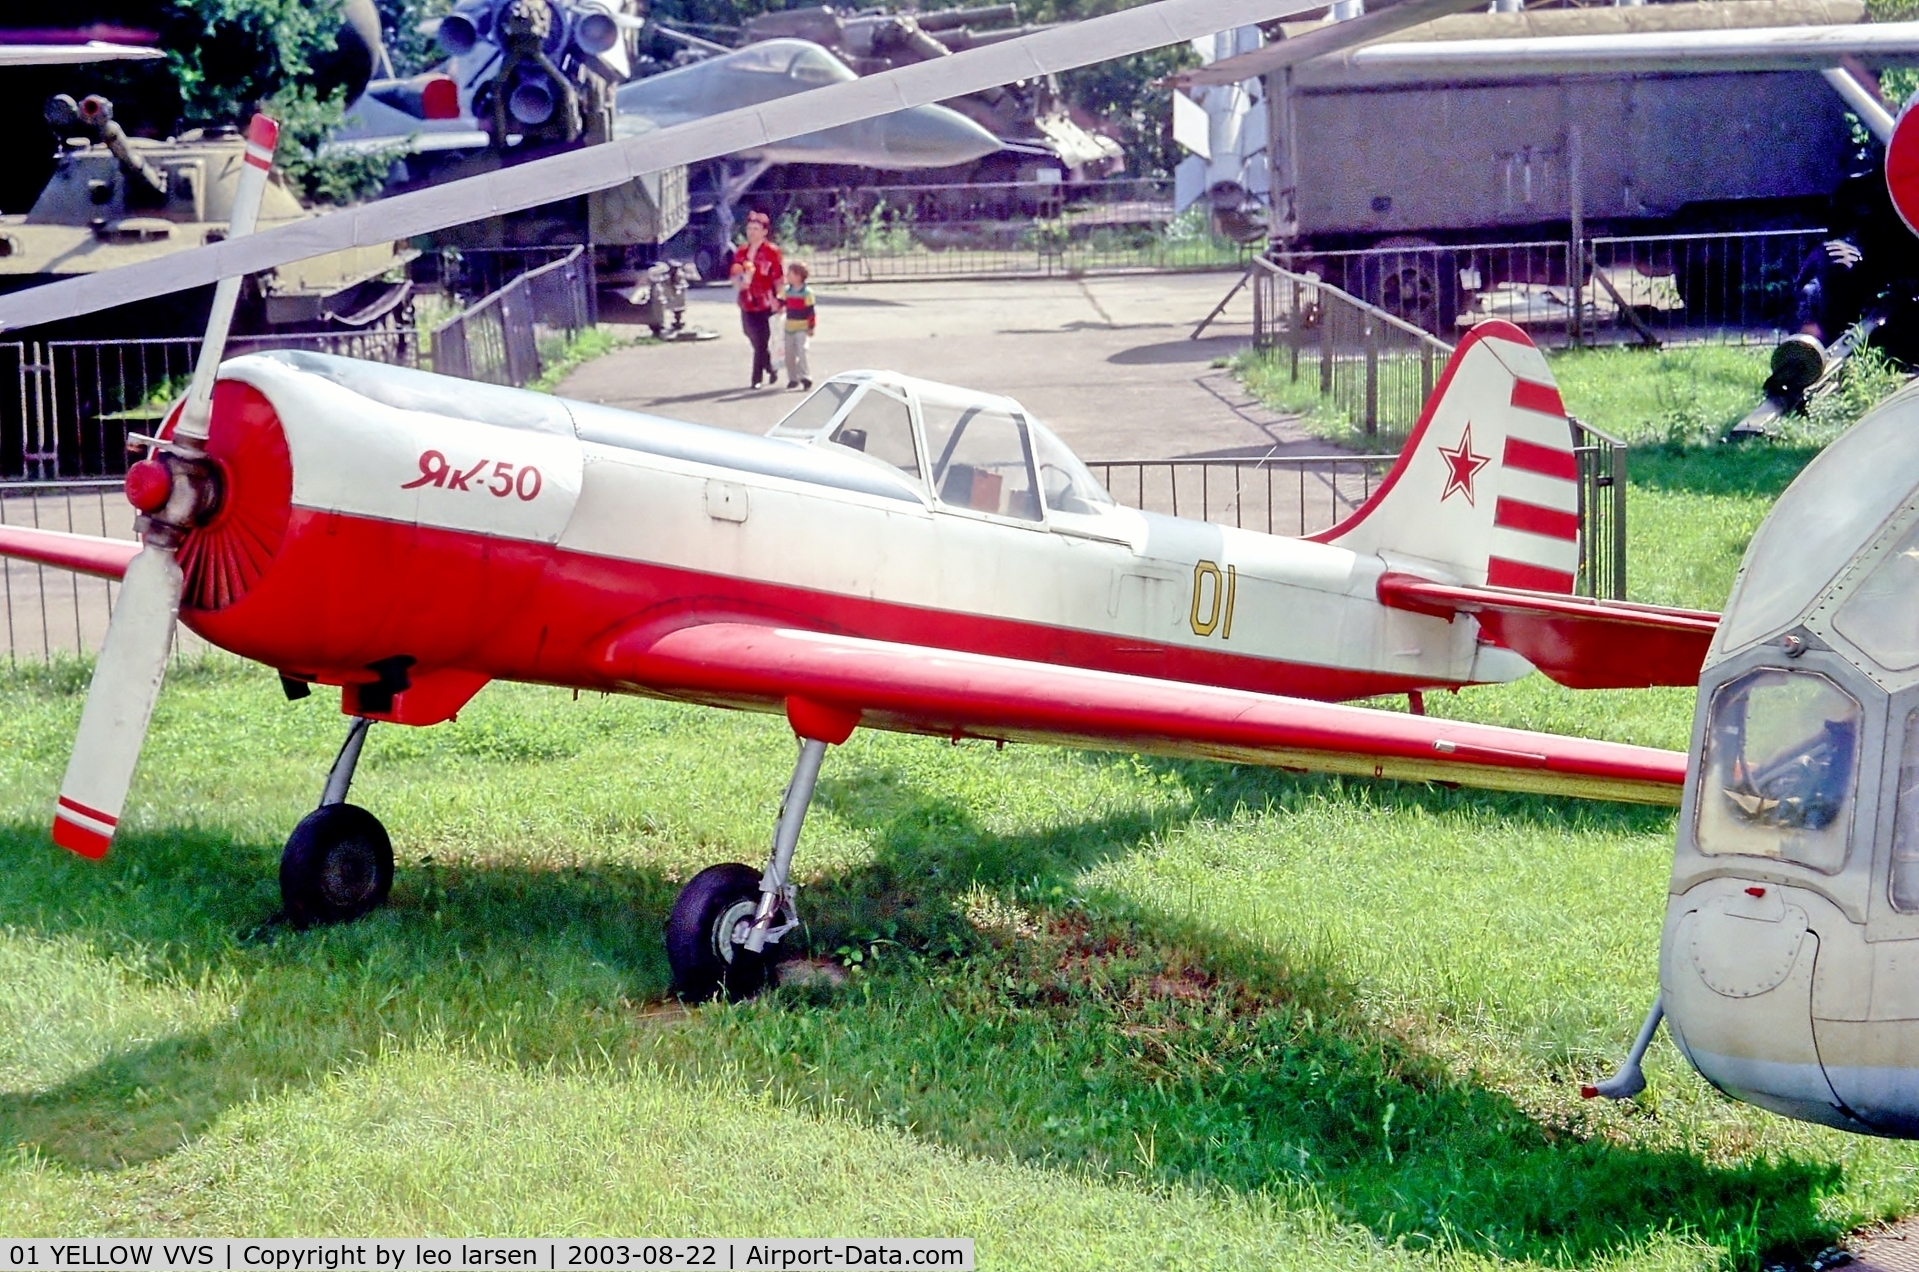 01 YELLOW VVS, 1976 Yakovlev Yak-50 C/N Prototype, Central Museum of Armed Forces Moscow 22.8.2003